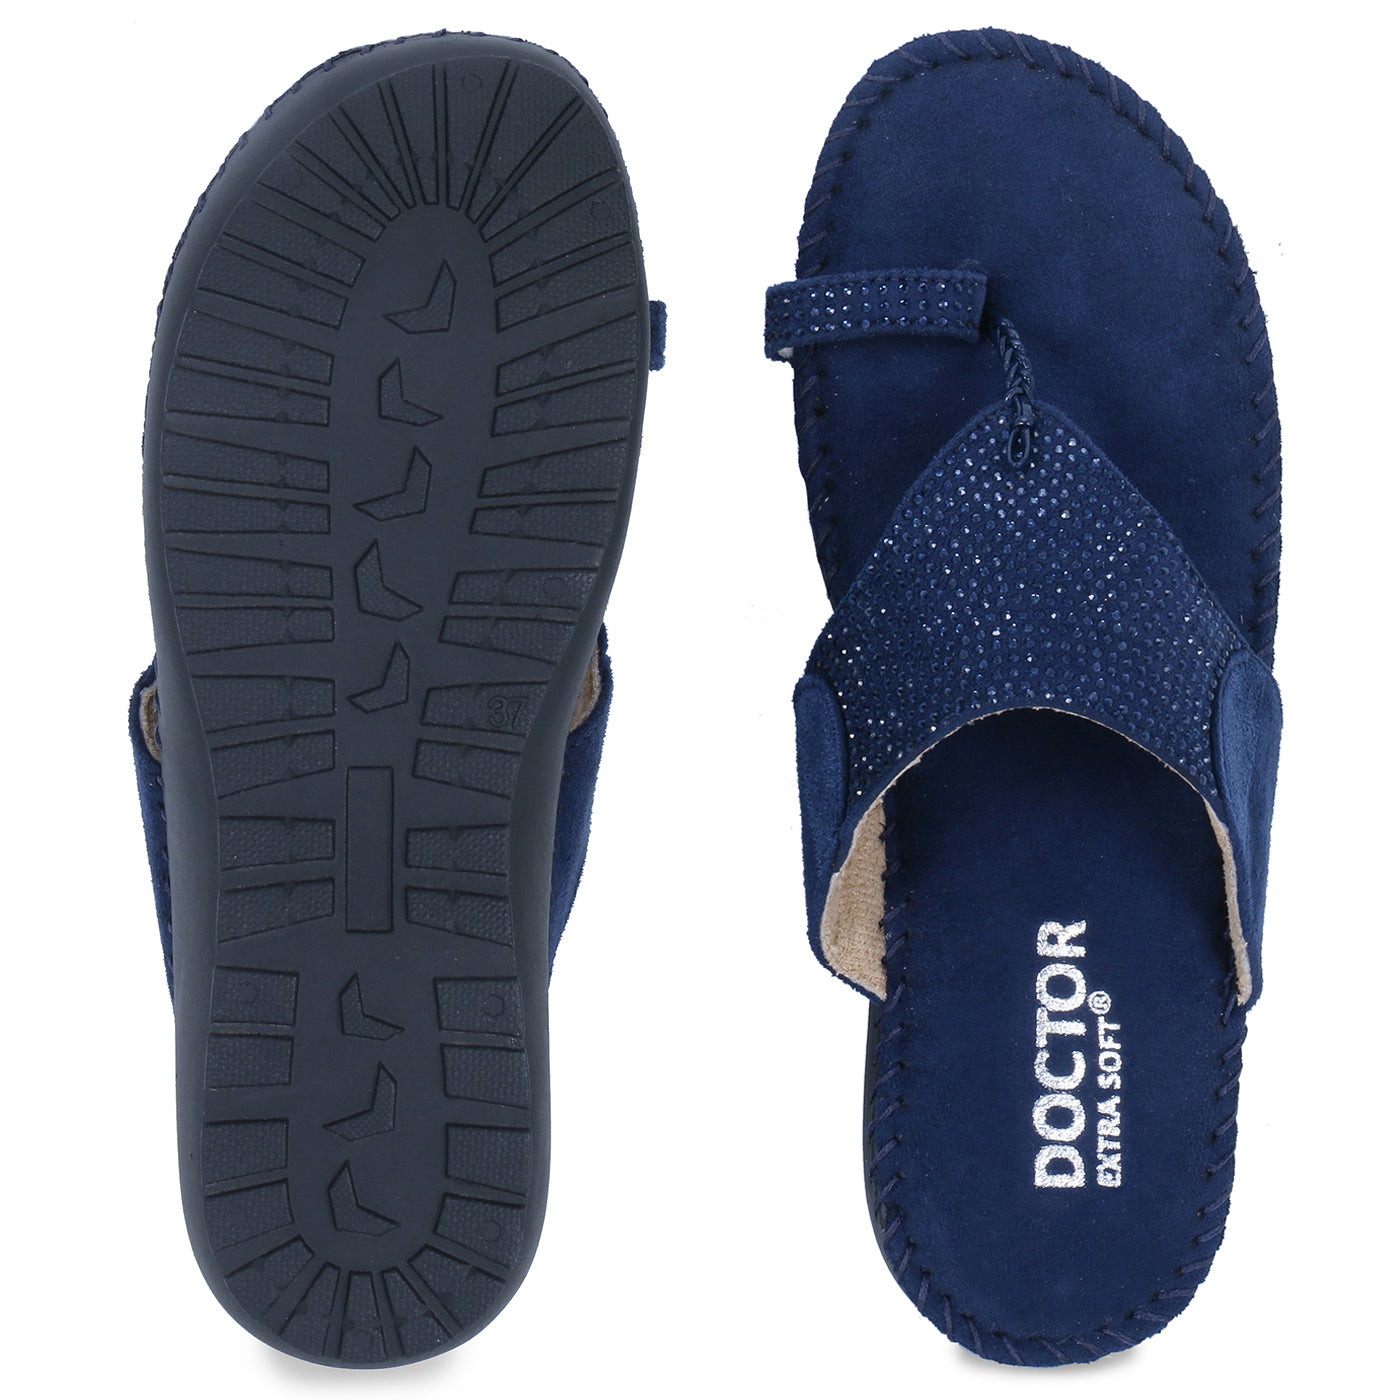 DOCTOR EXTRA SOFT D-611 Chappal Ortho Care Orthopaedic and Diabetic Comfort Doctor Flip-Flop and House Slipper's for Women's